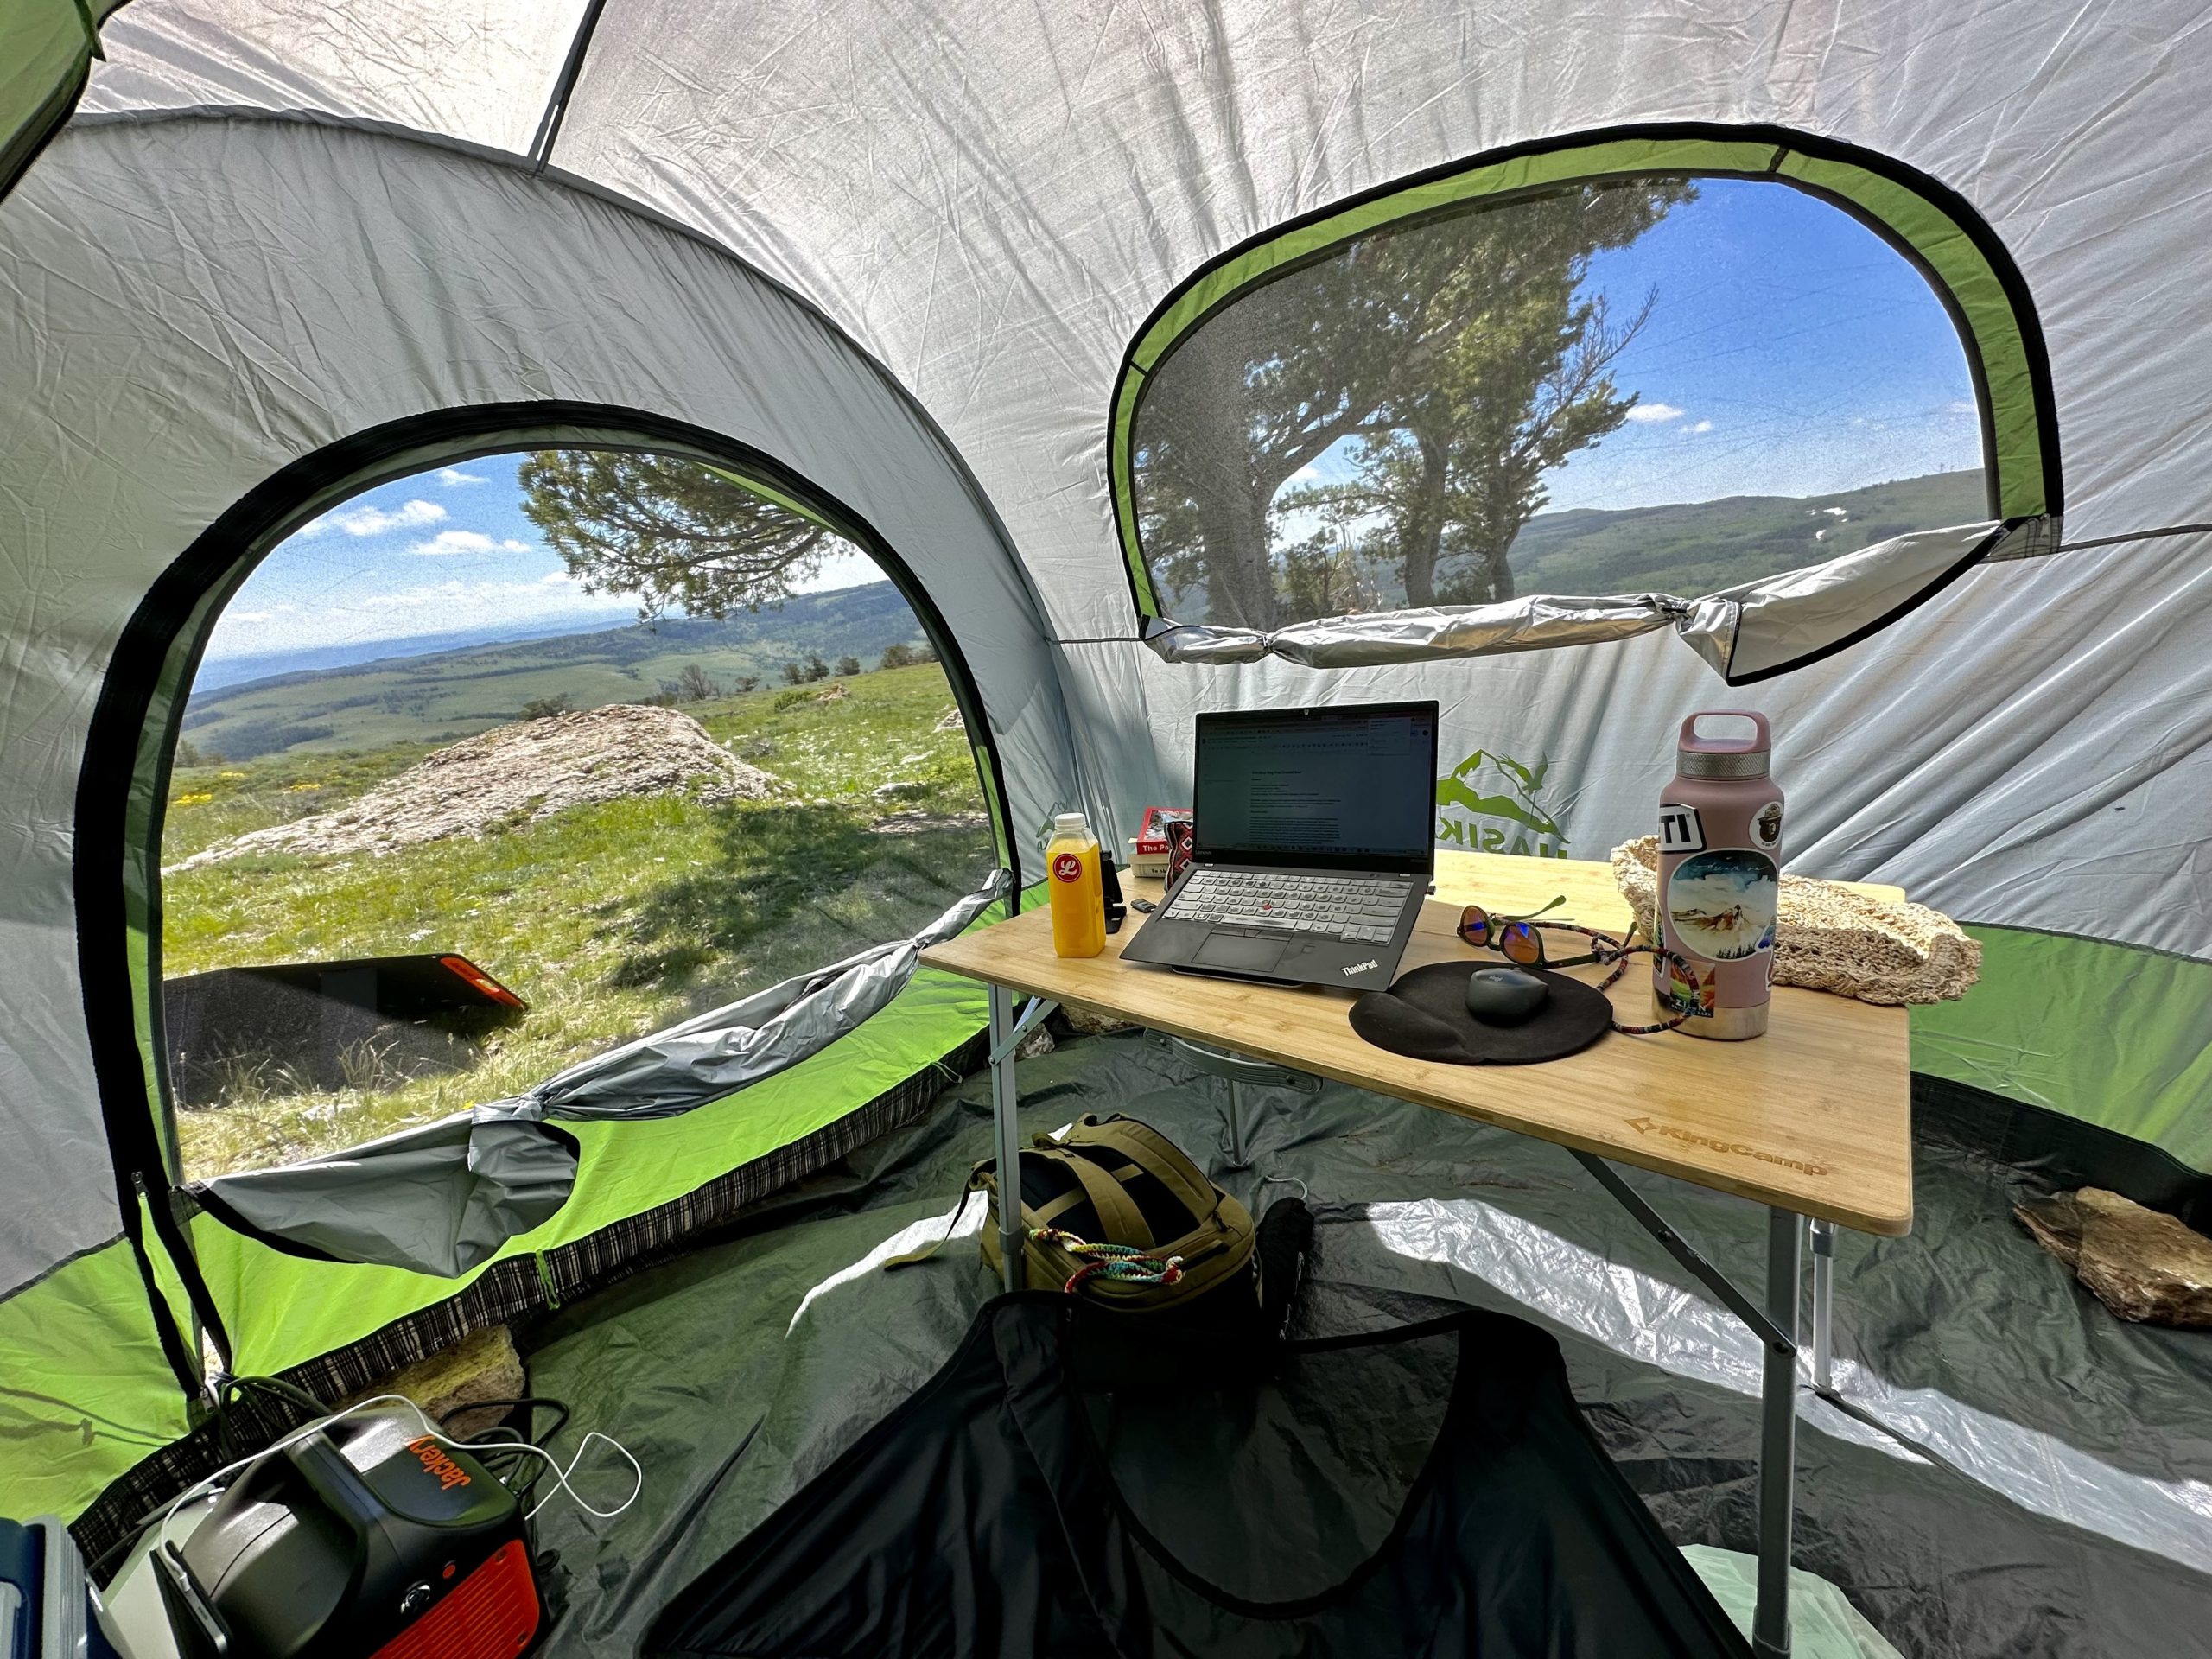 How To Get WiFi While Camping